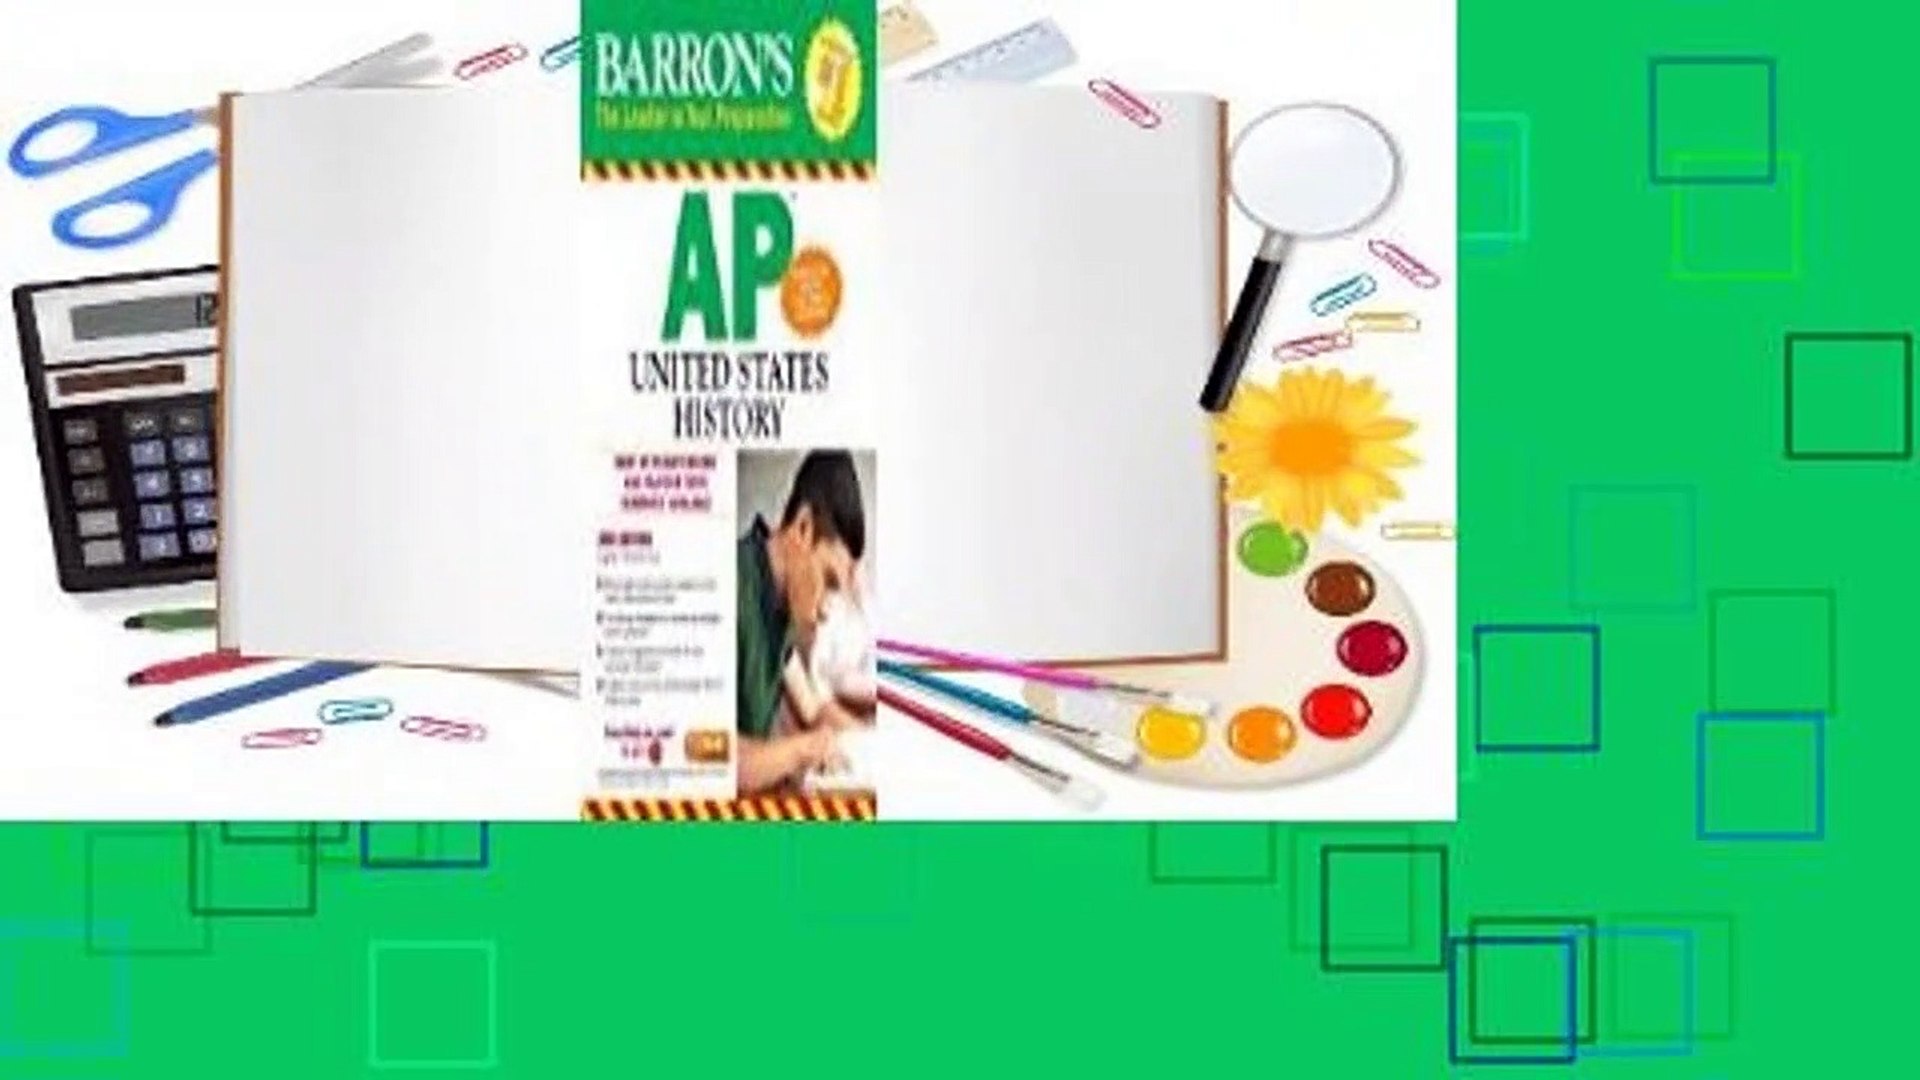 Complete Barron's AP United States History for Students.